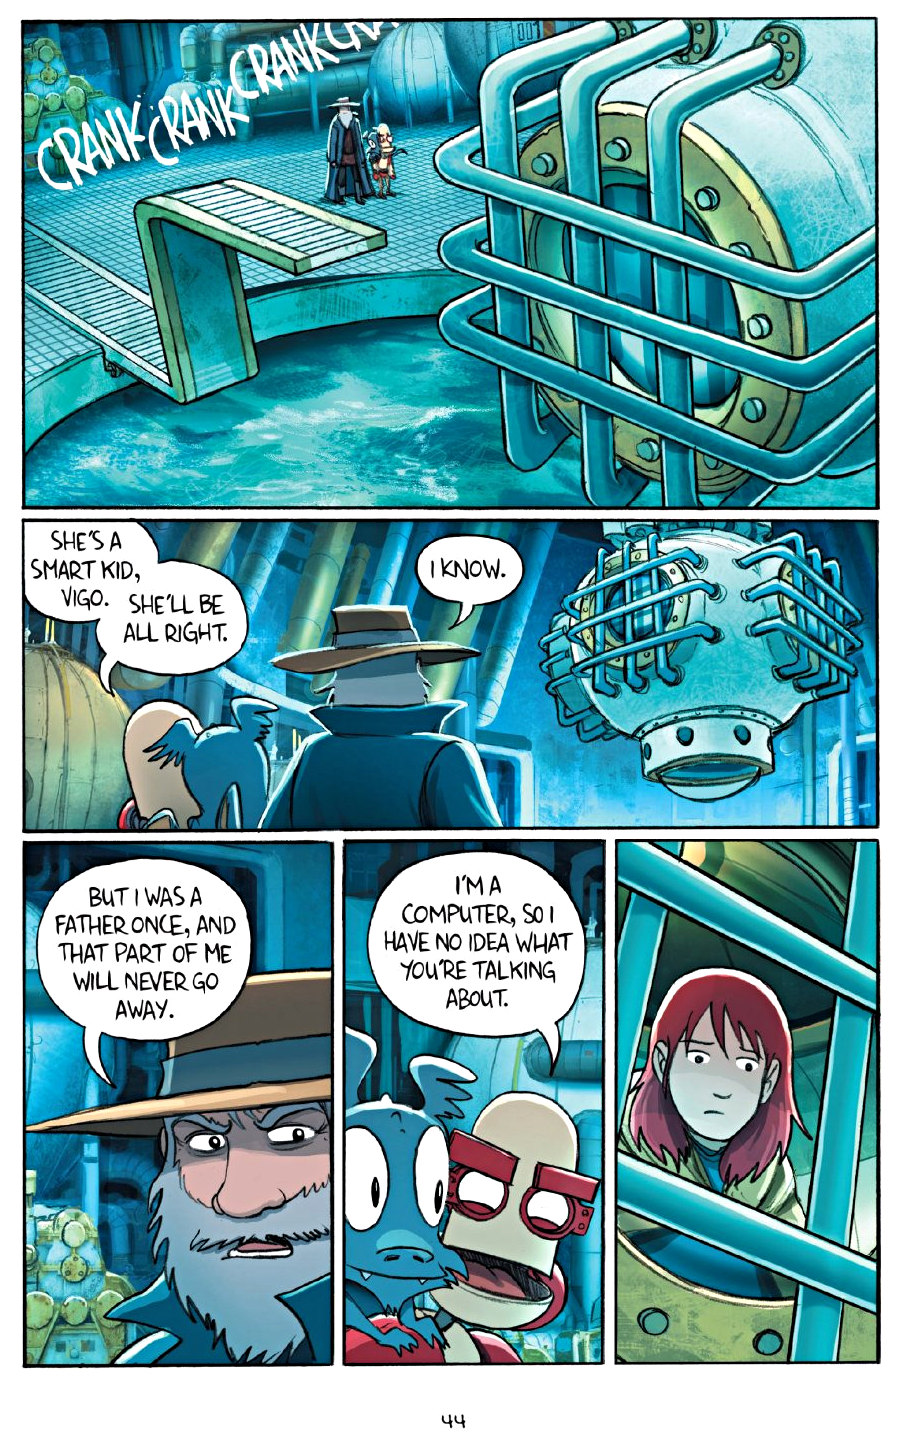 page 44 of amulet 7 firelight graphic novel